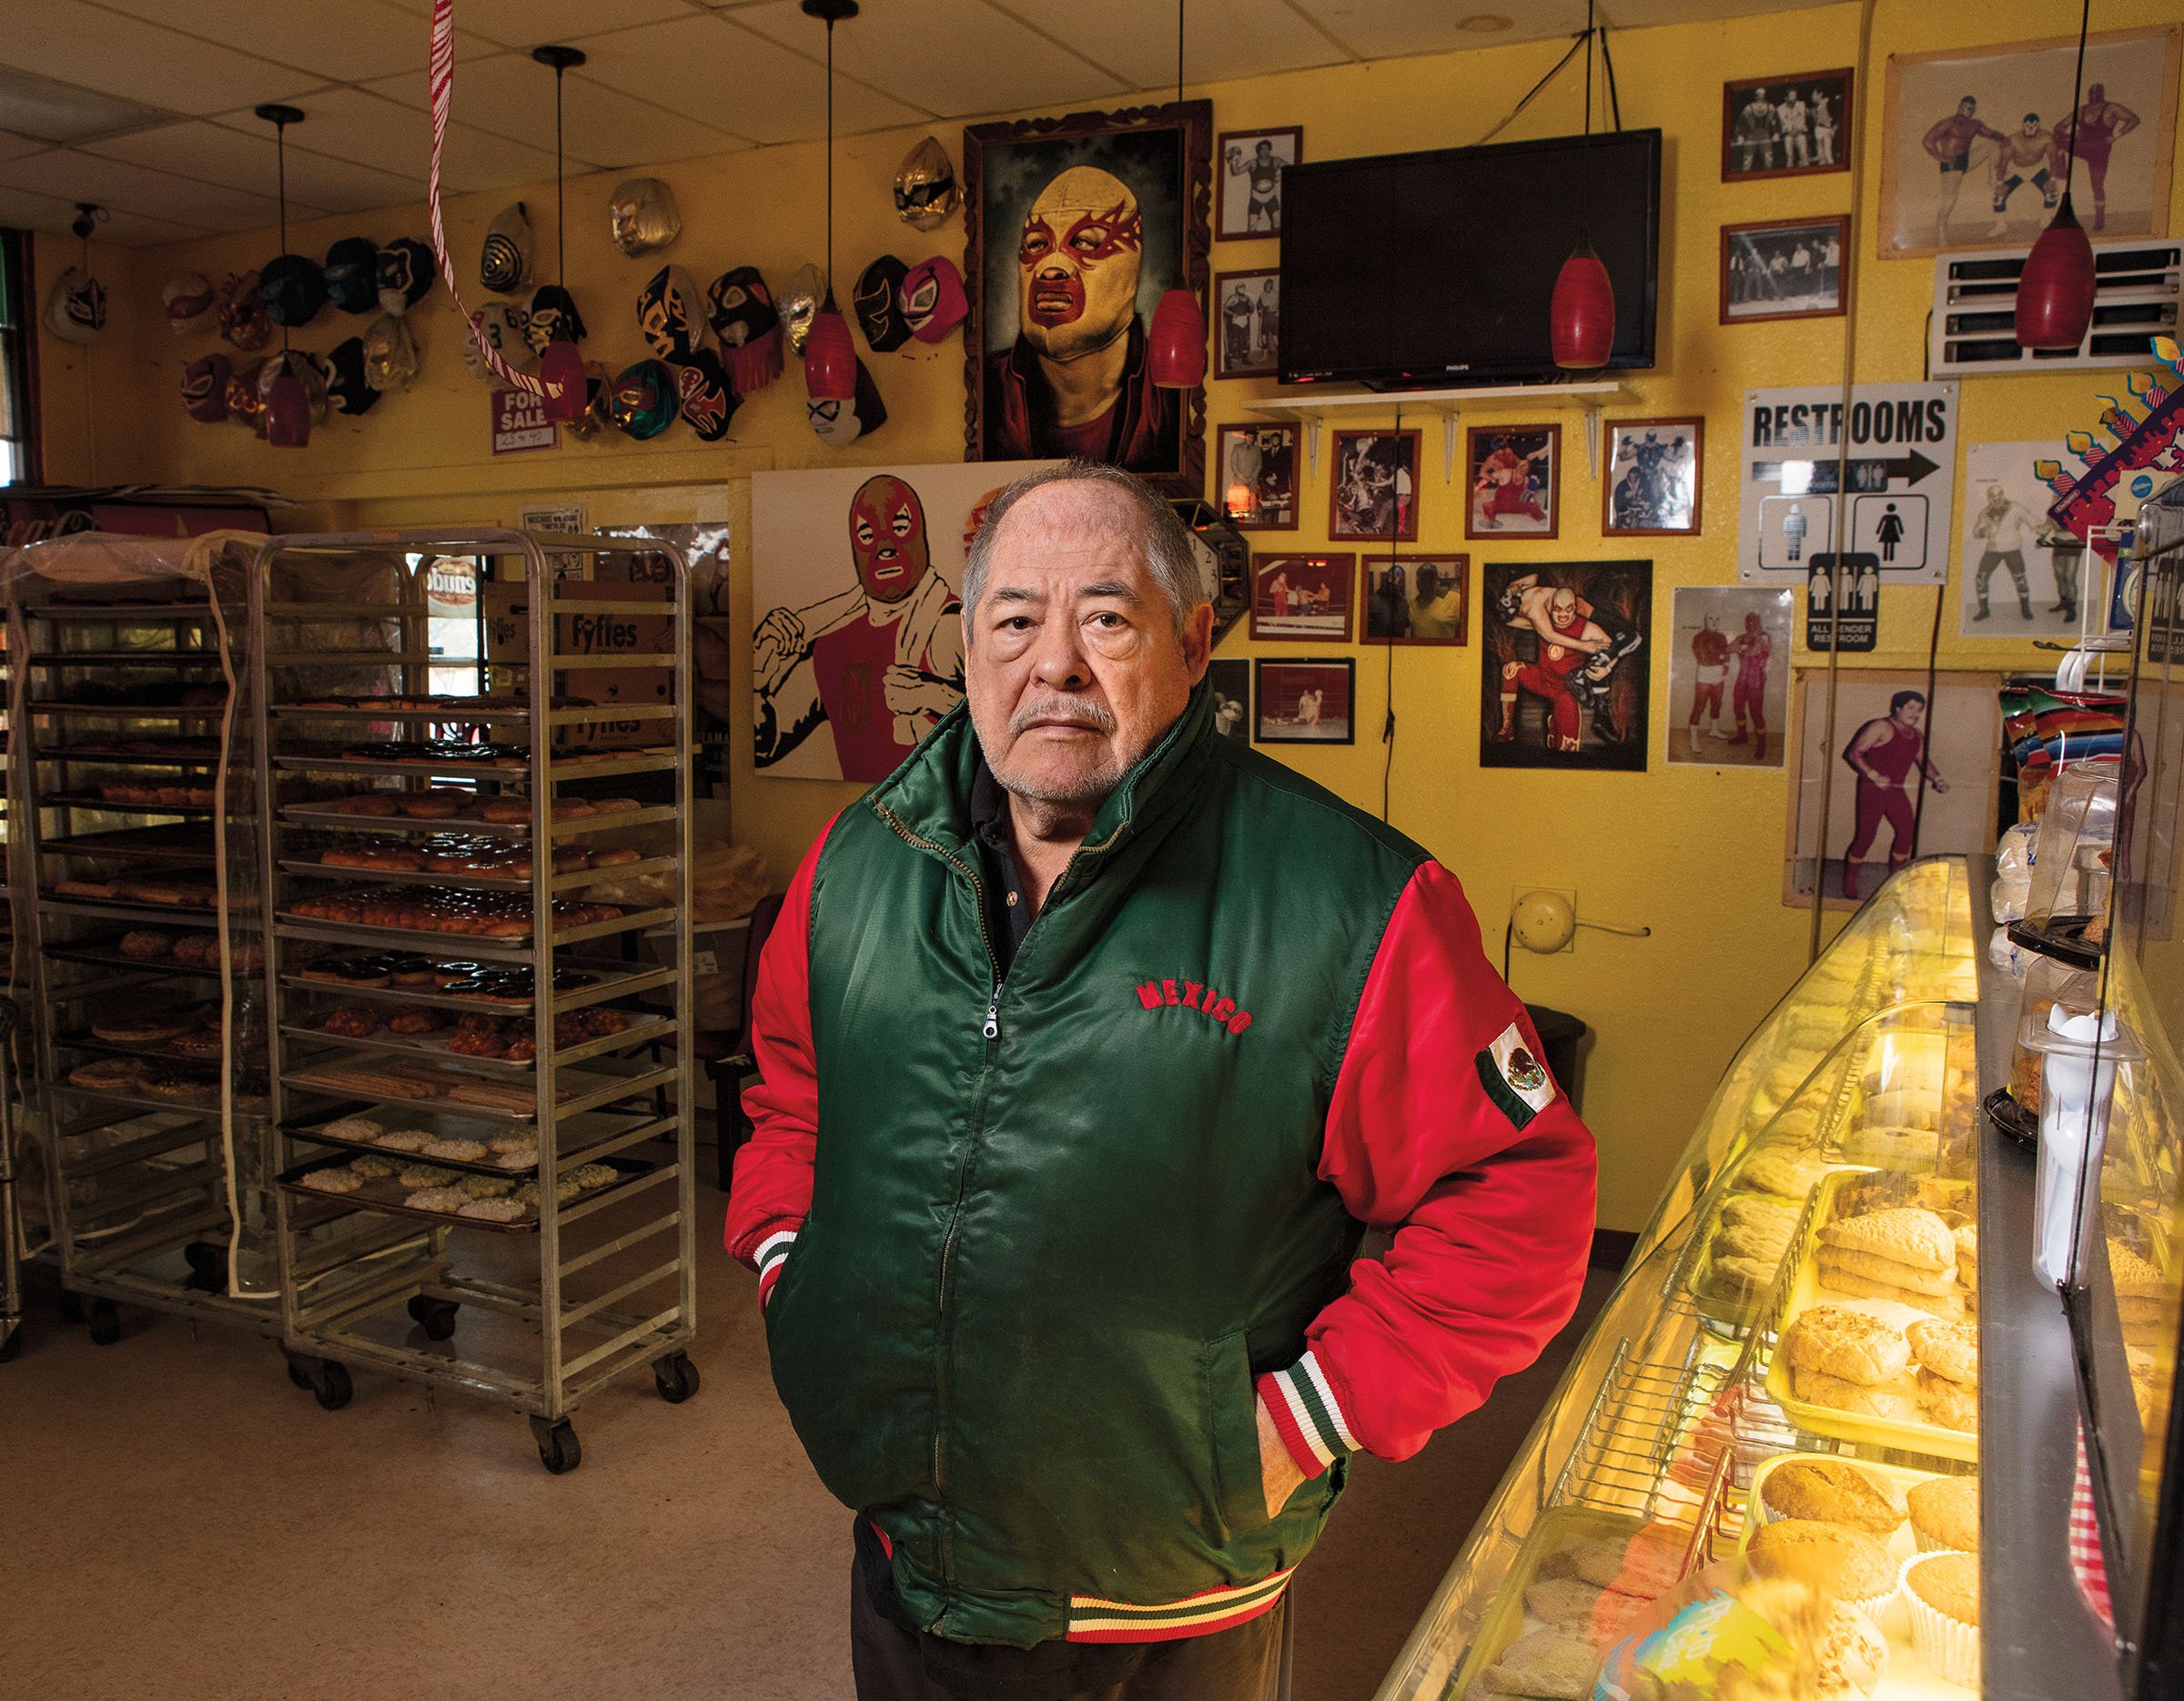 A man in a green and red jacket stands in a bakery, with walls filled with photos and memorabilia of lucha libre